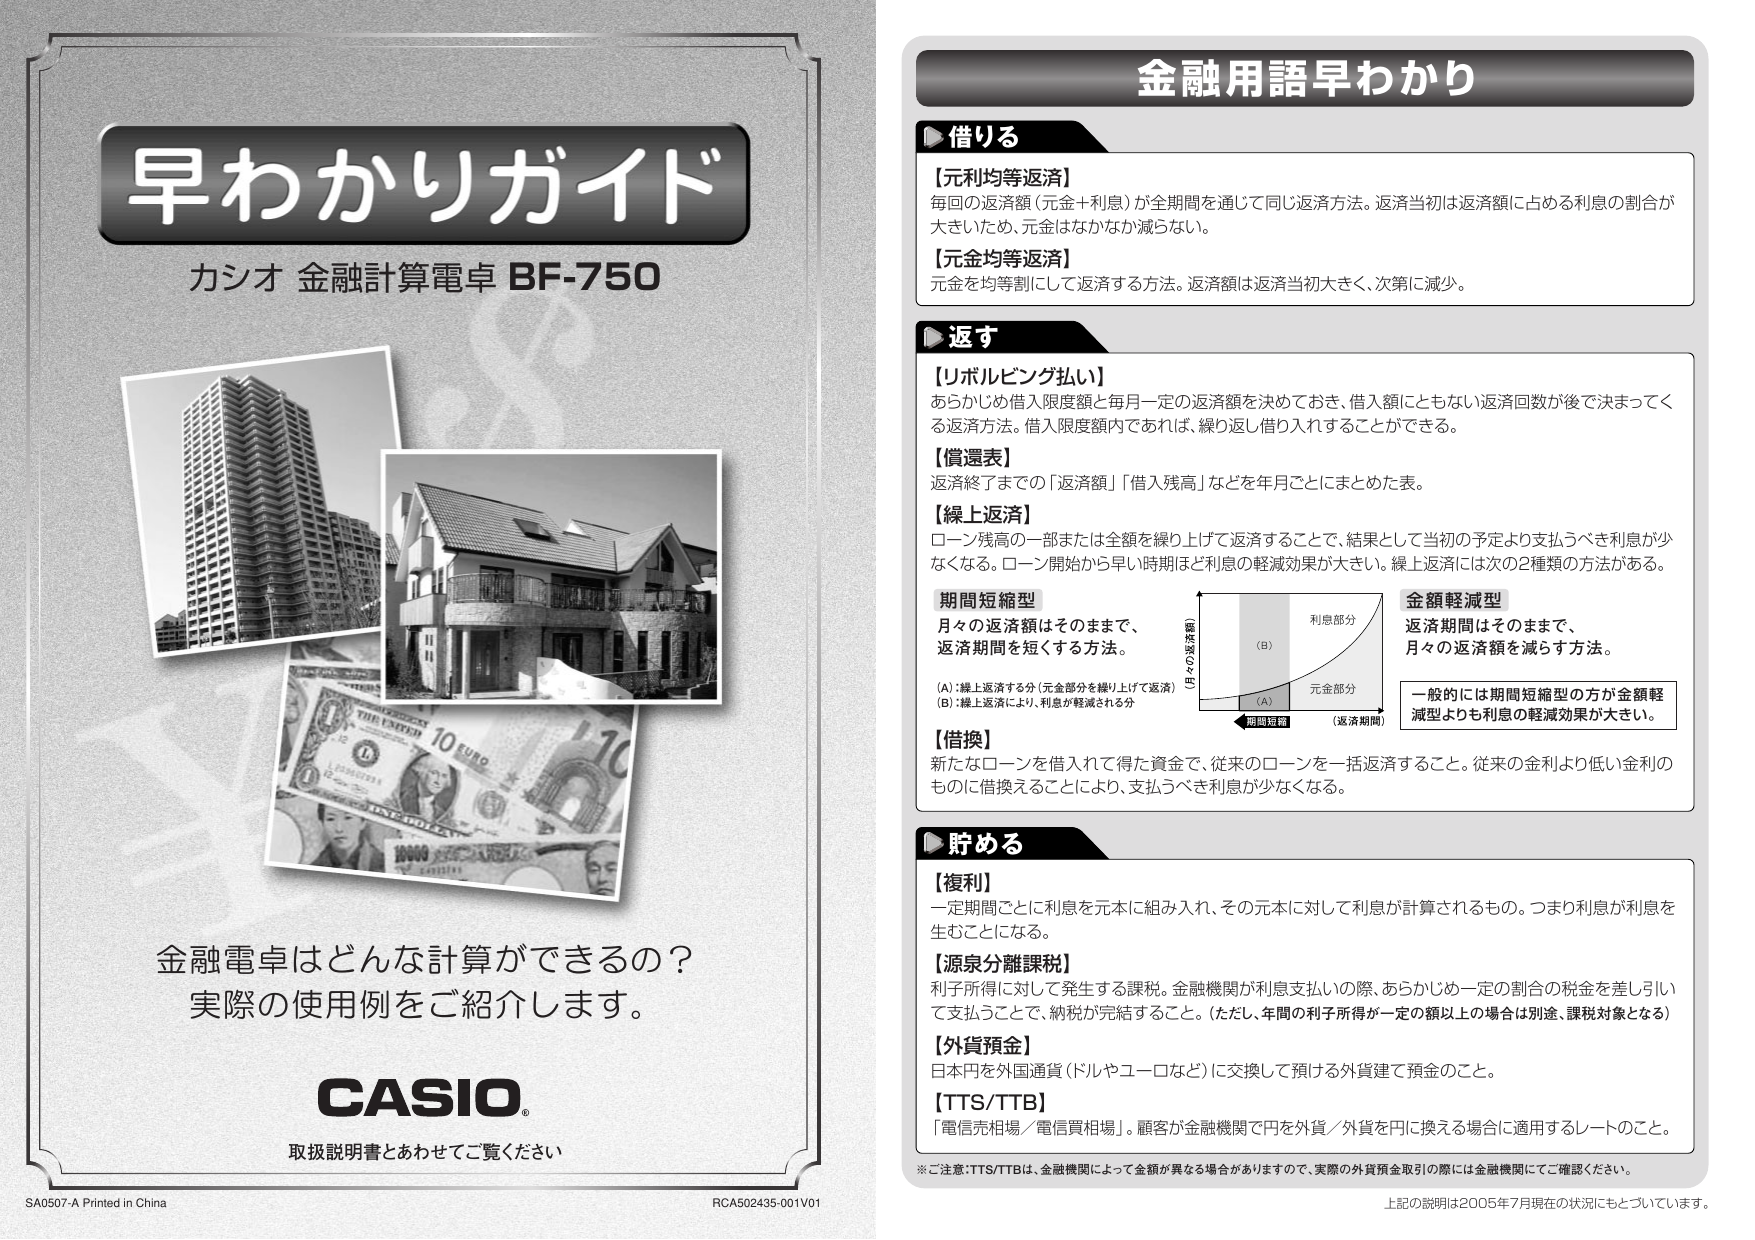 Casio Bf 750 Quickguide J 750早わかりガイド 750 Quick Guide